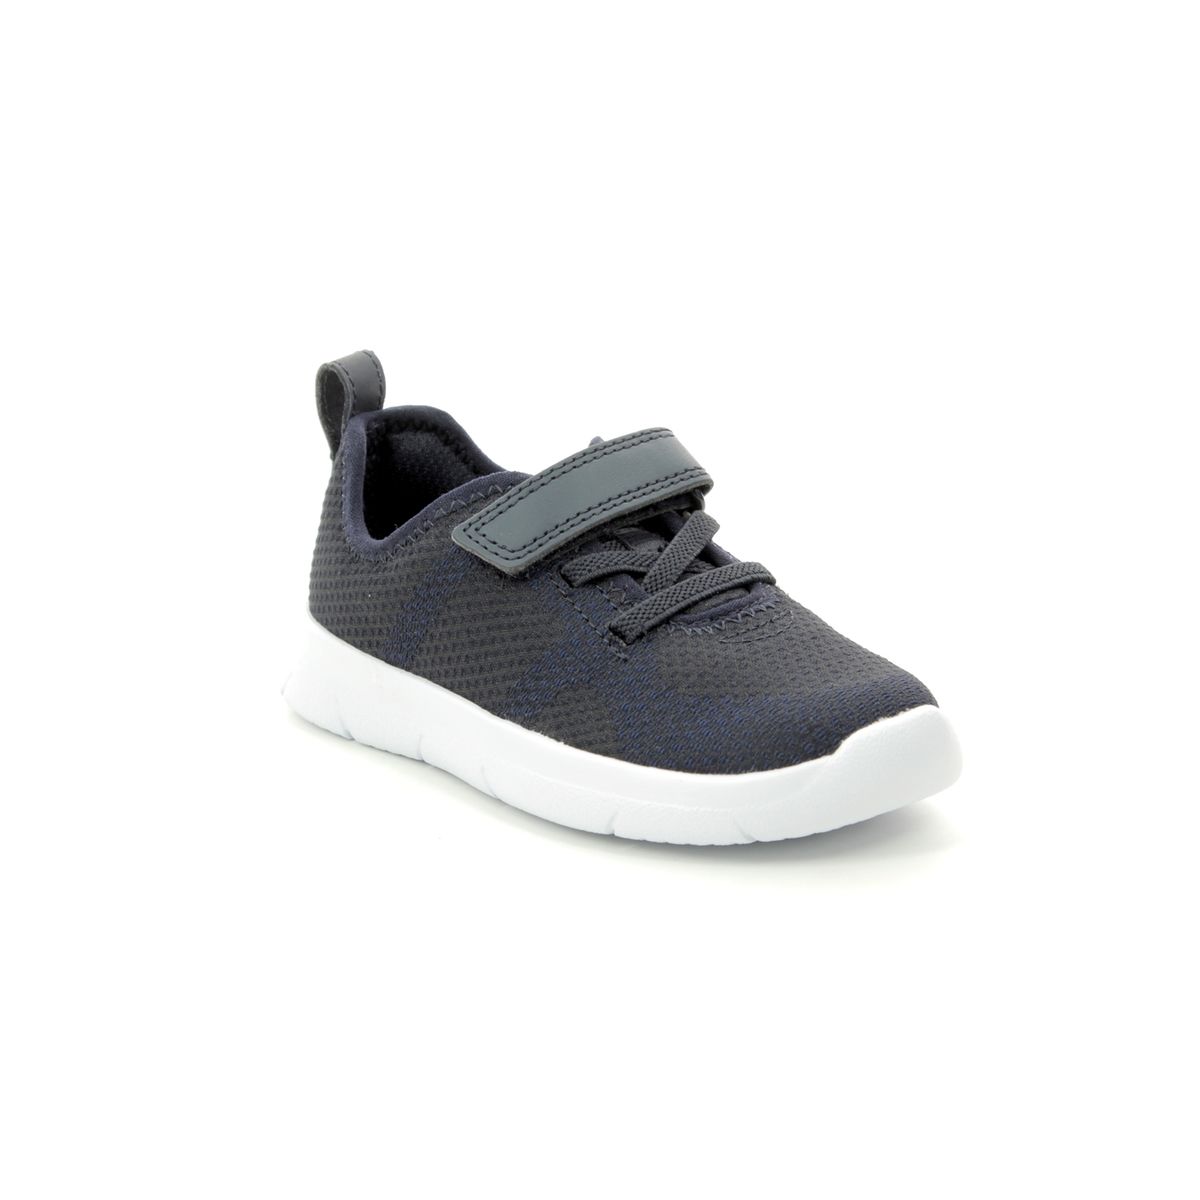 Clarks Ath Flux T Navy Kids Toddler Boys Trainers 412697G In Size 5.5 In Plain Navy G Width Fitting For kids